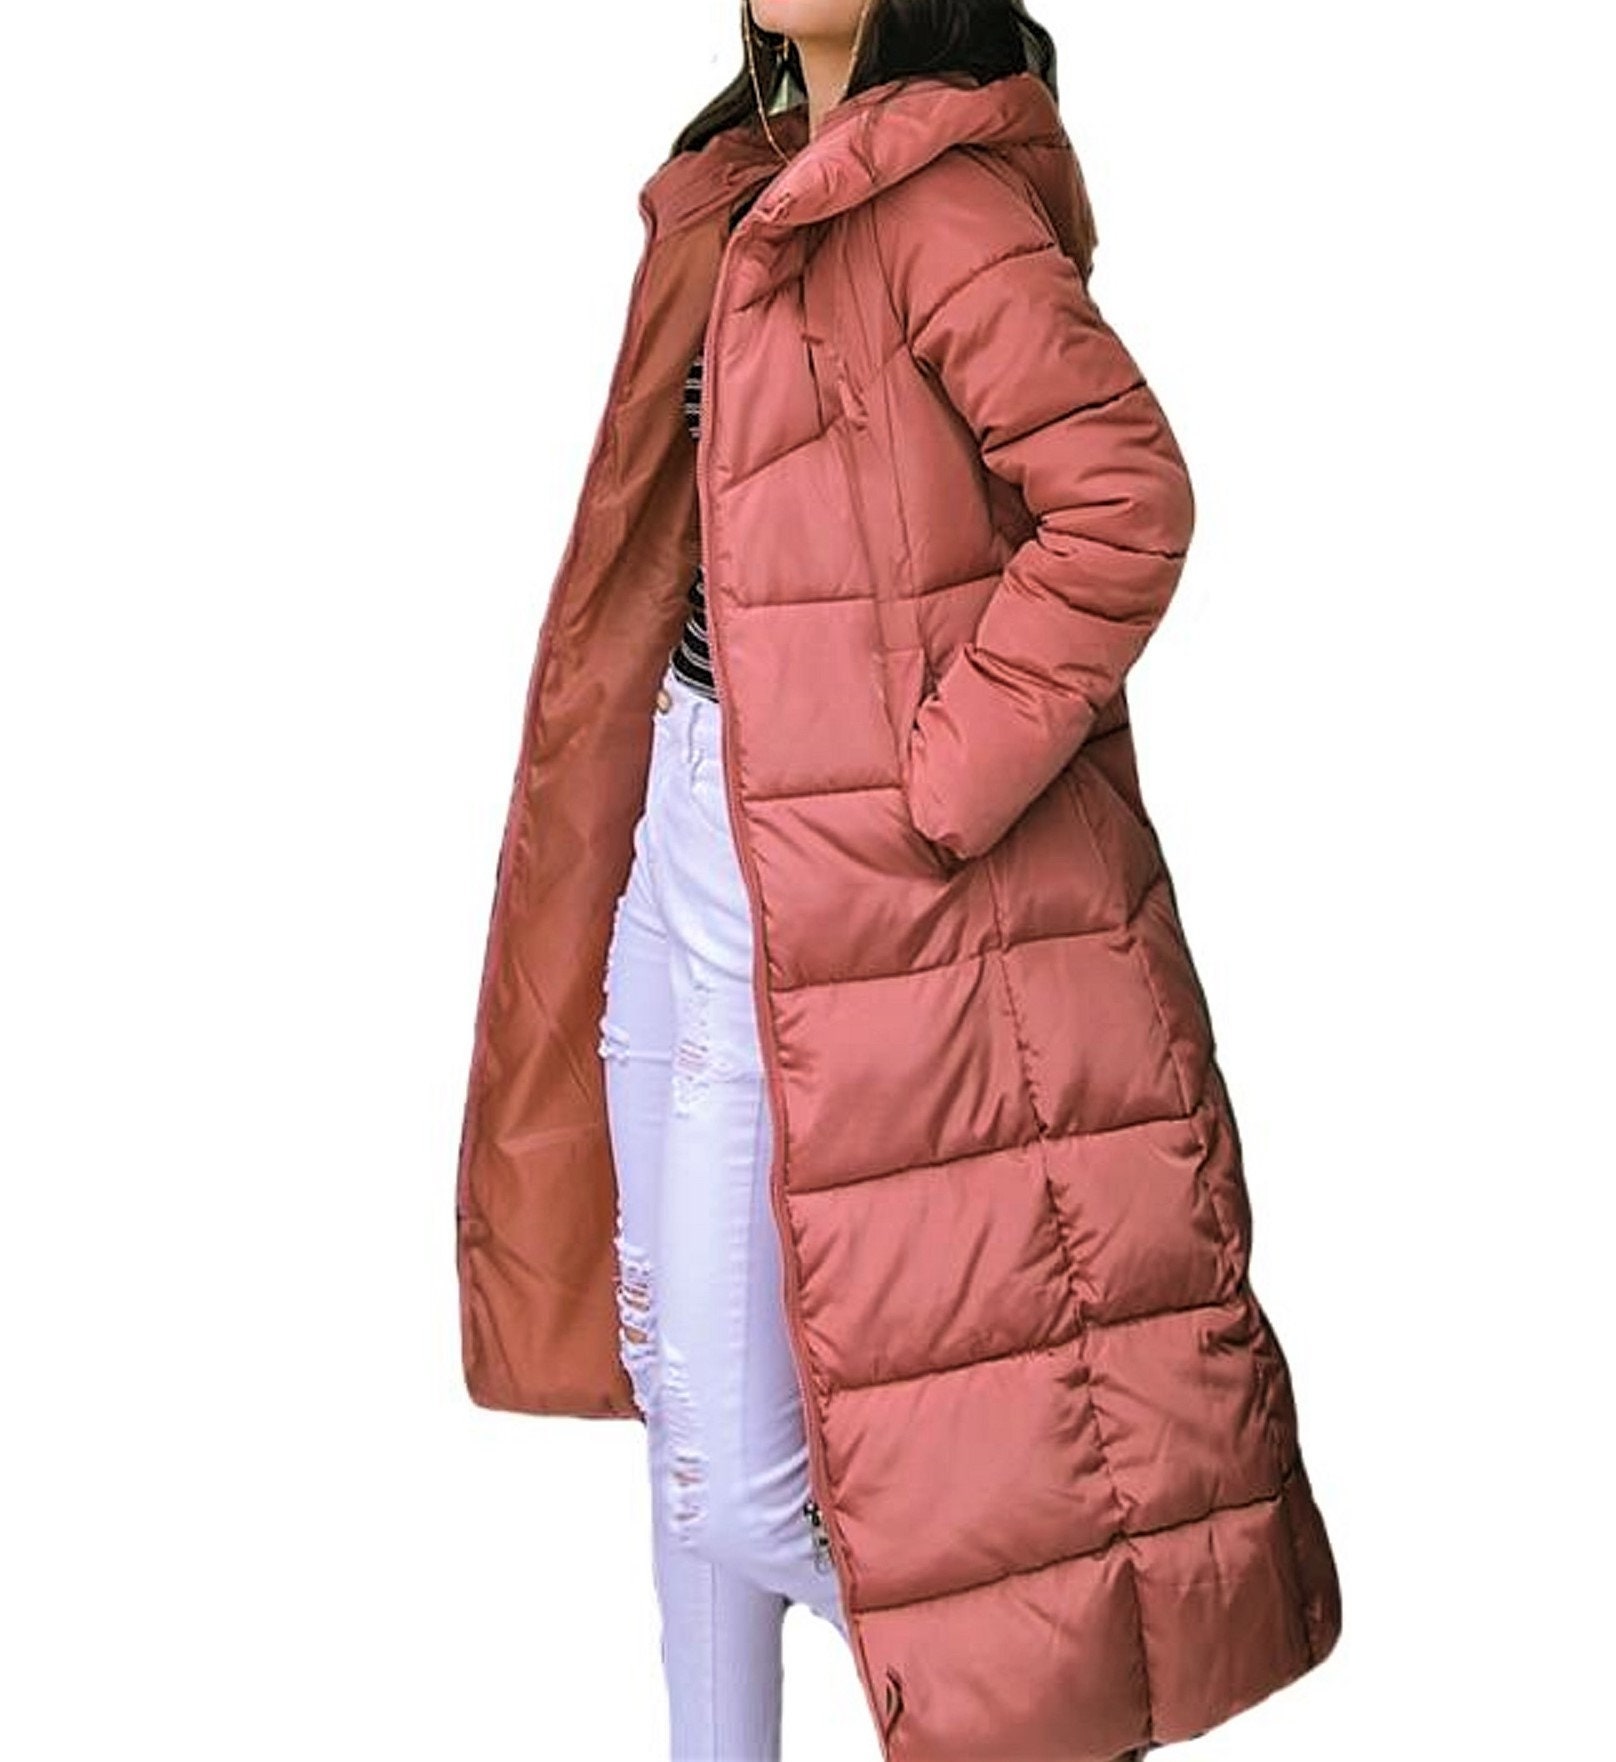 Plus Sizes Womens Hooded Padded Long Coat in 9 Colours sizes | Etsy